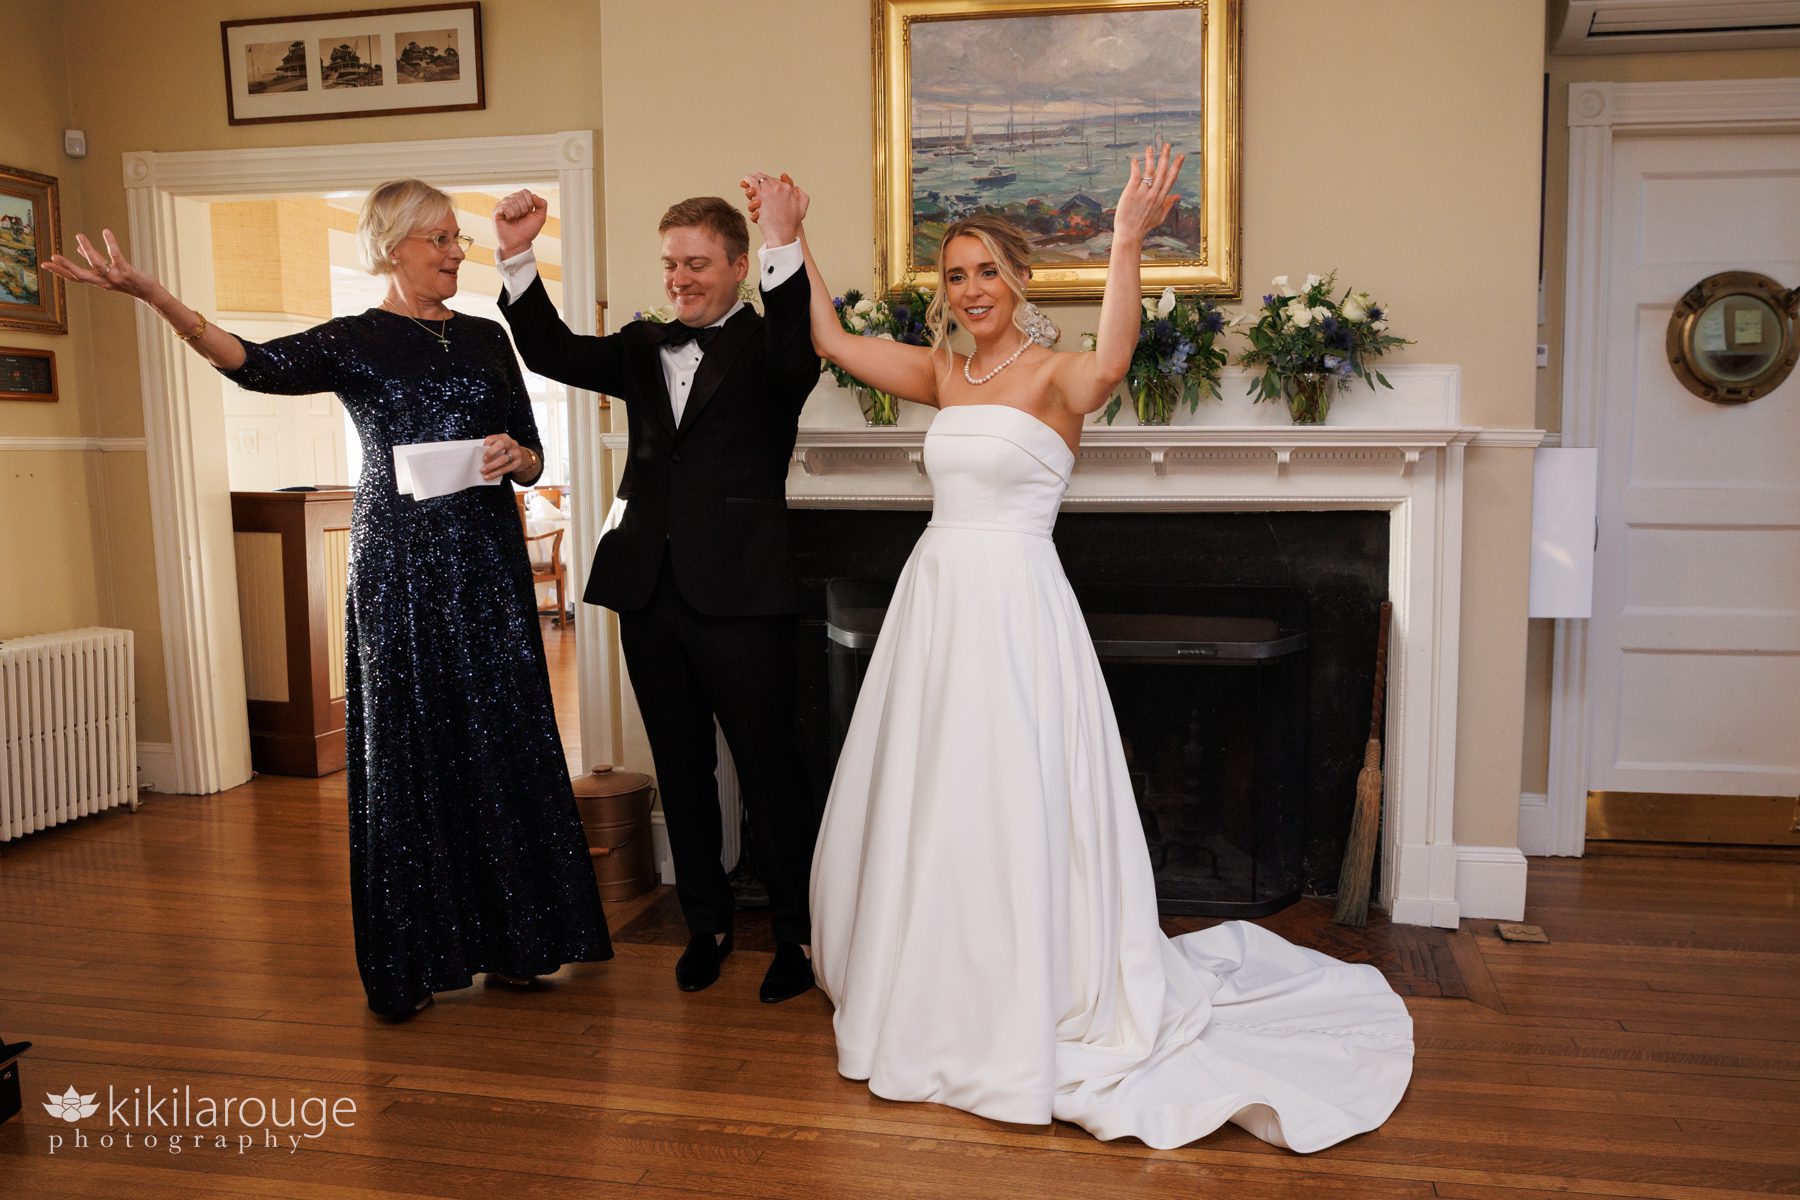 Couple and official with hands in air celebrating just getting married in yacht club in front of fireplace